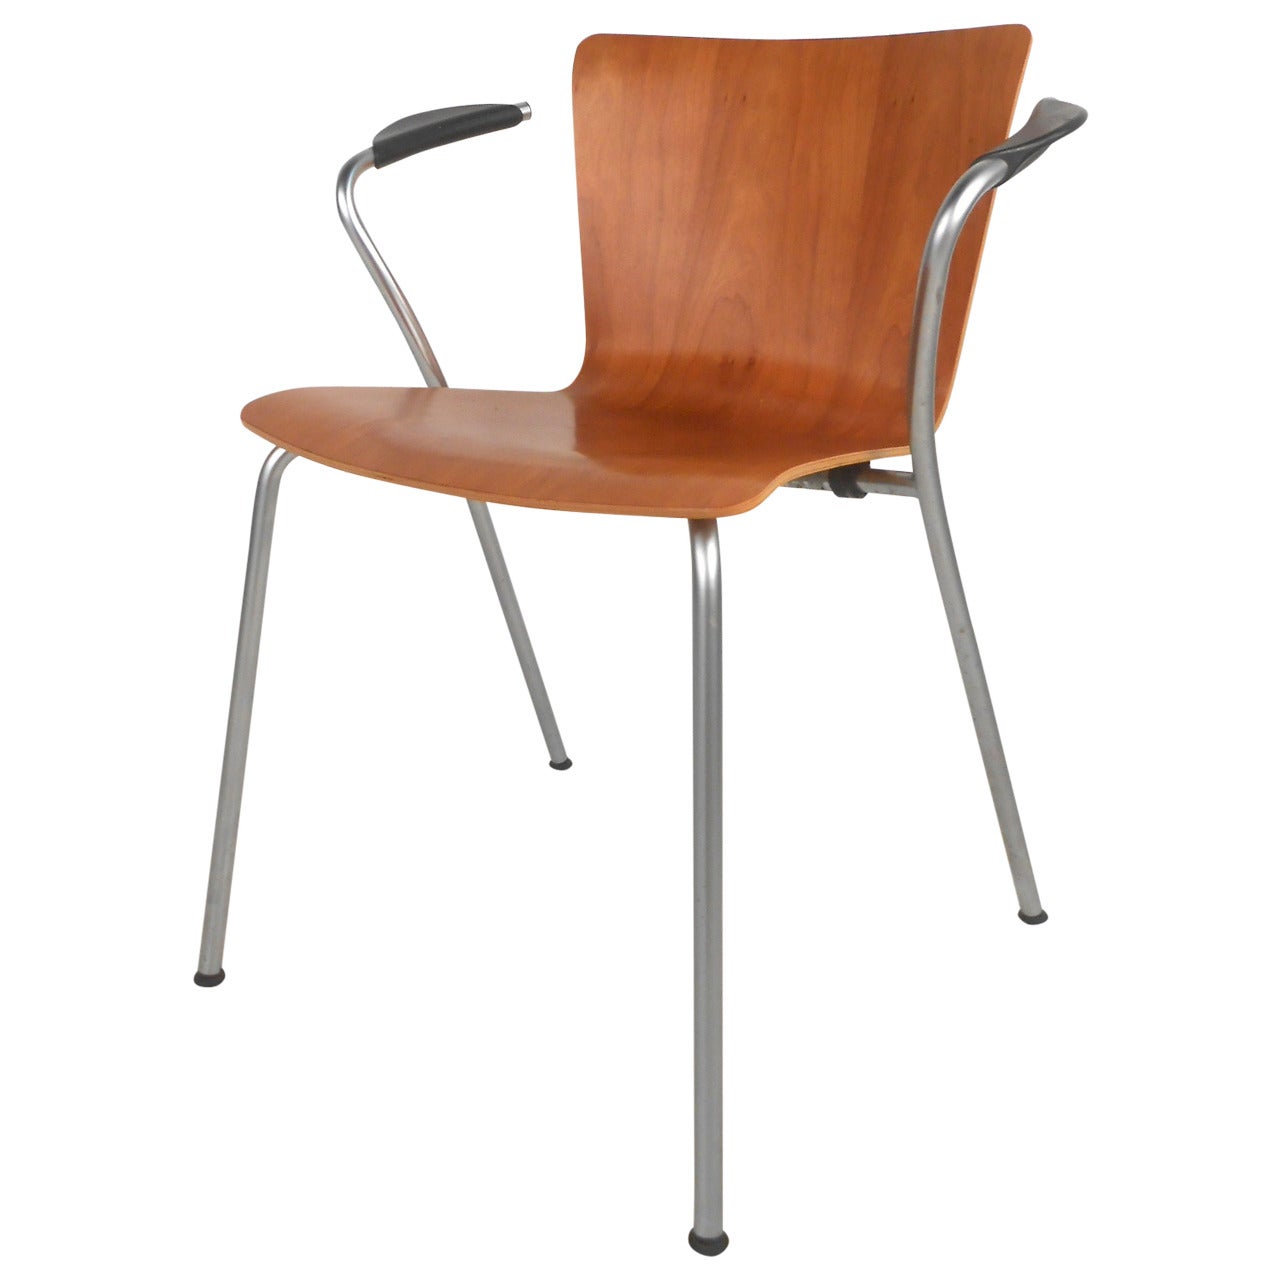 VicoDuo Chair by Vico Magistretti for Fritz Hansen and Knoll Studio